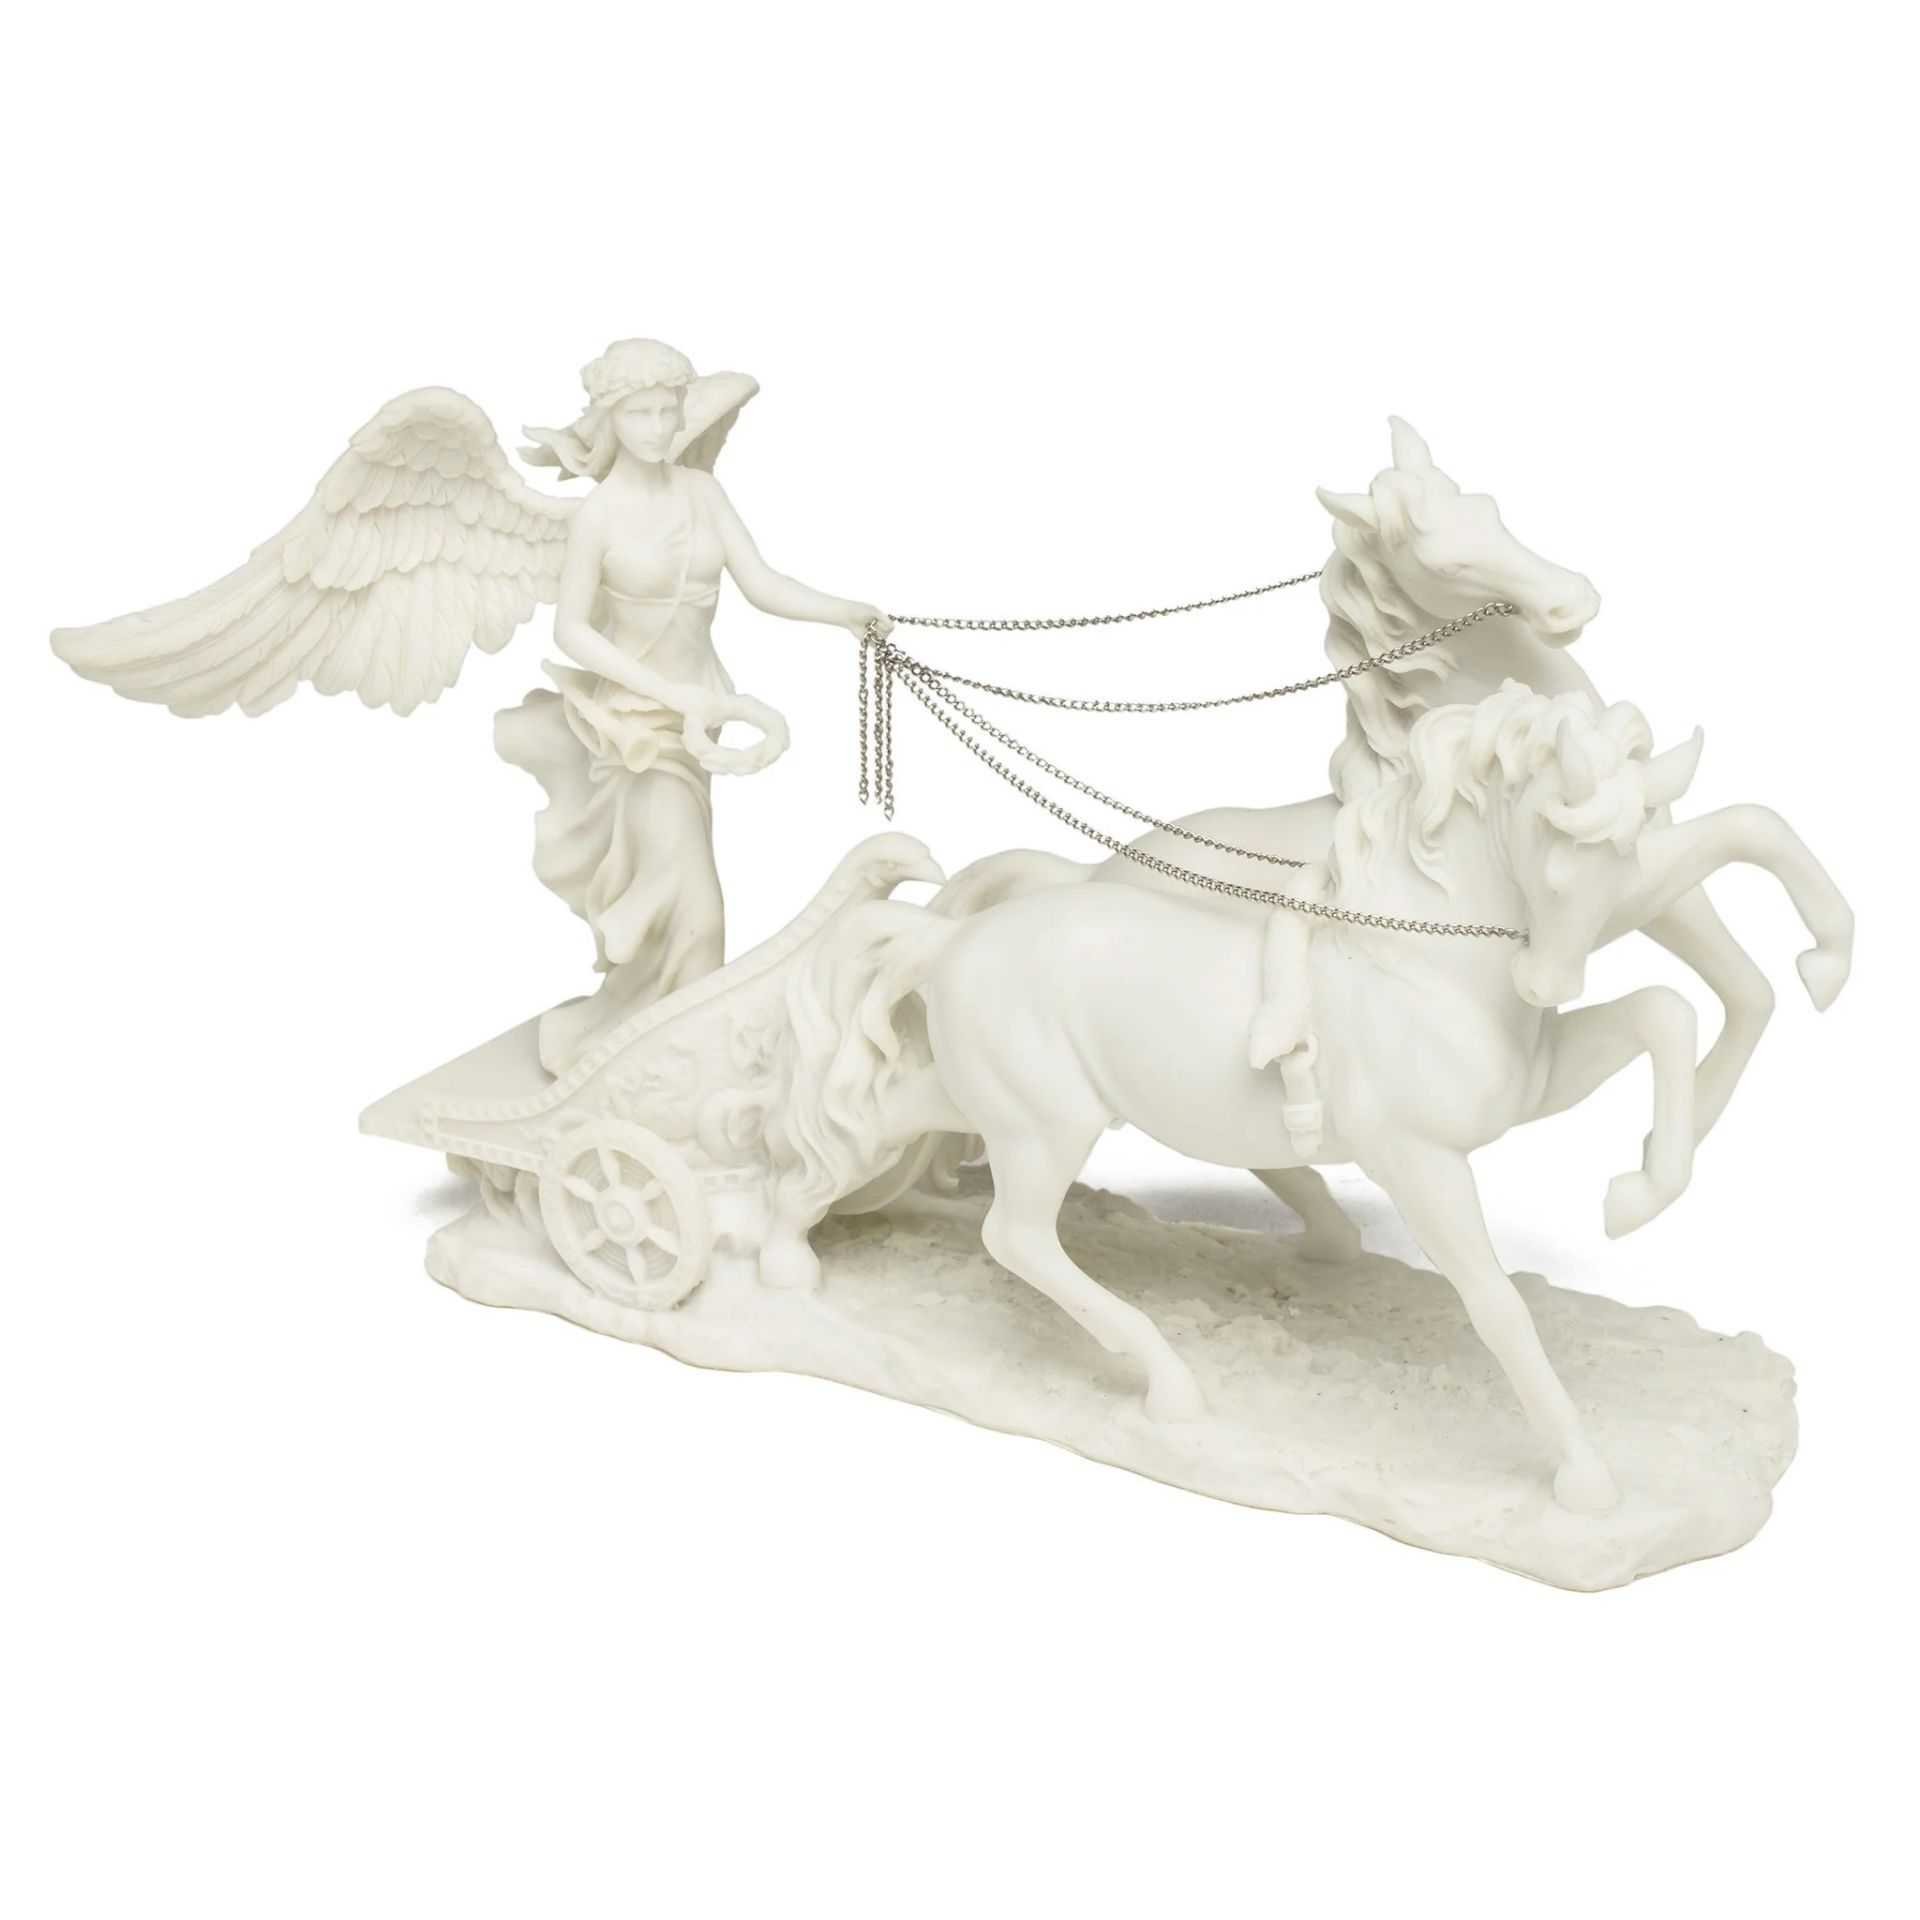 Nike, The Goddess of Victory, Chariot, Sculpture